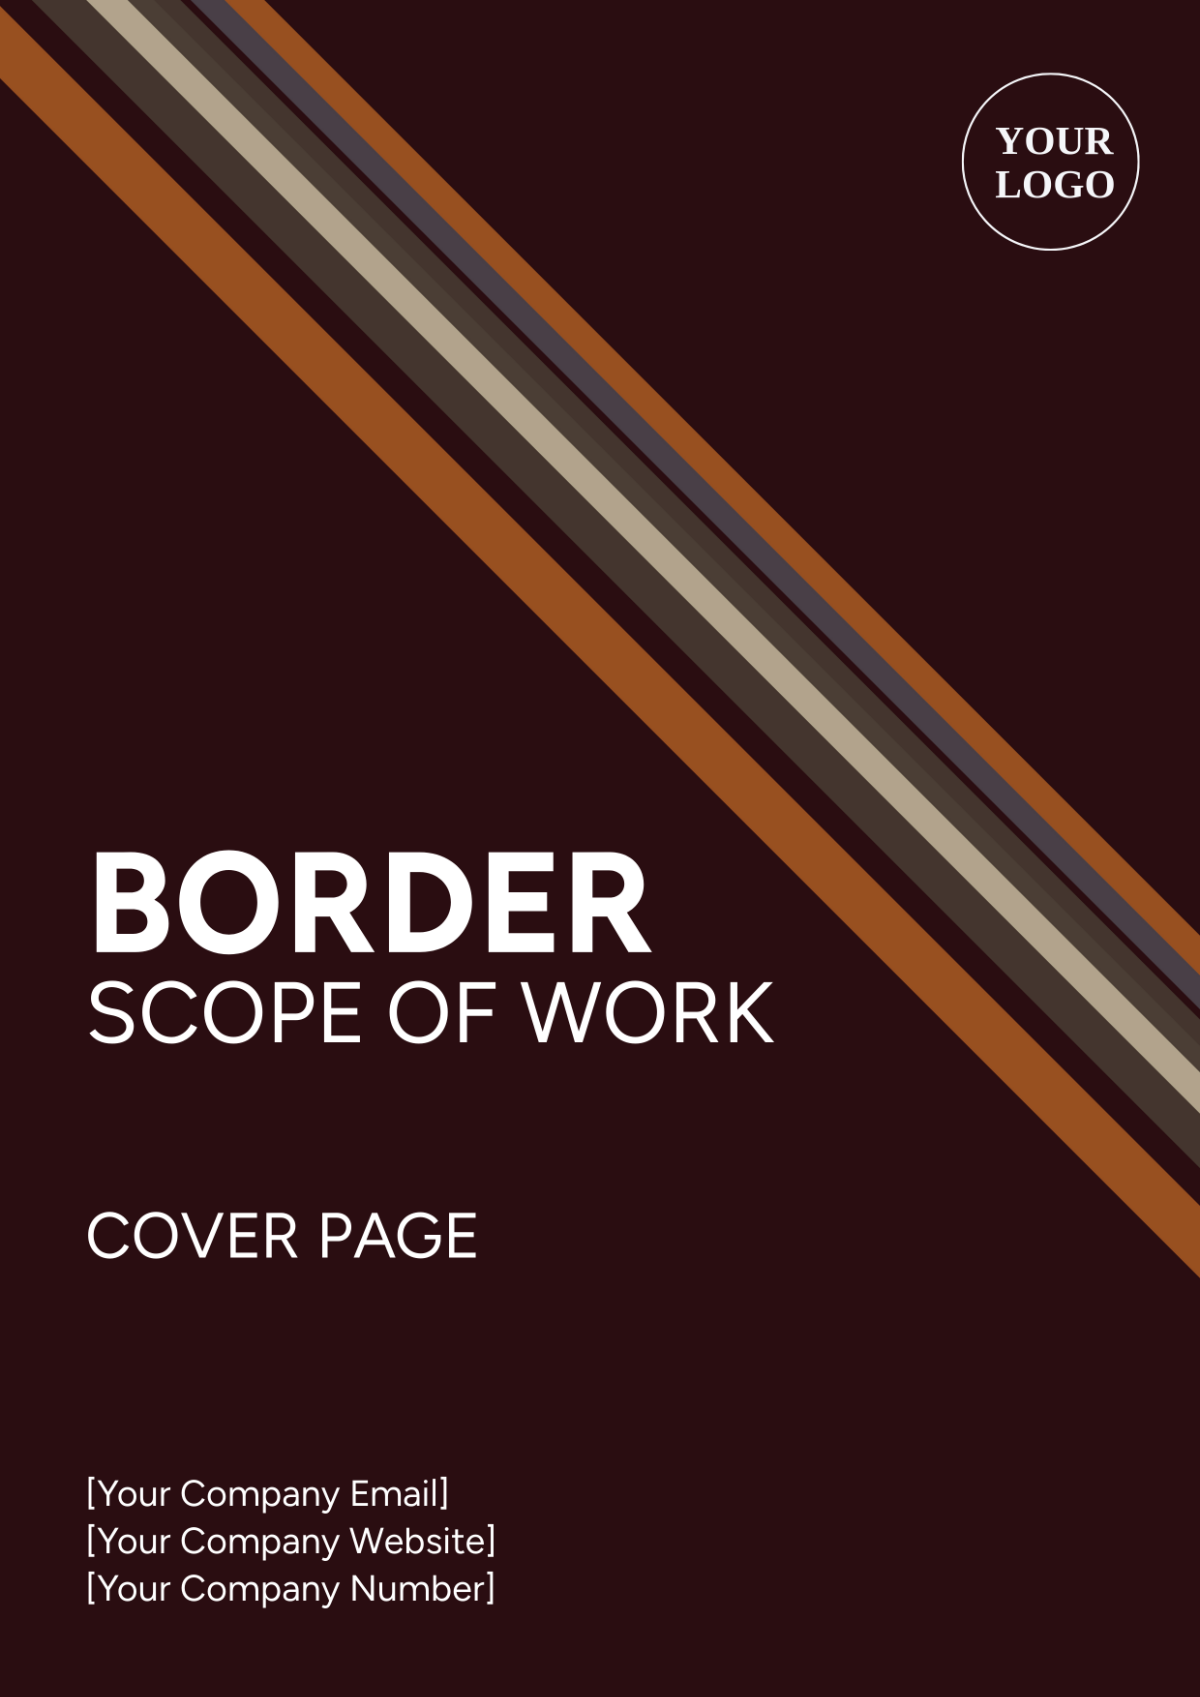 Border Scope of Work Cover Page